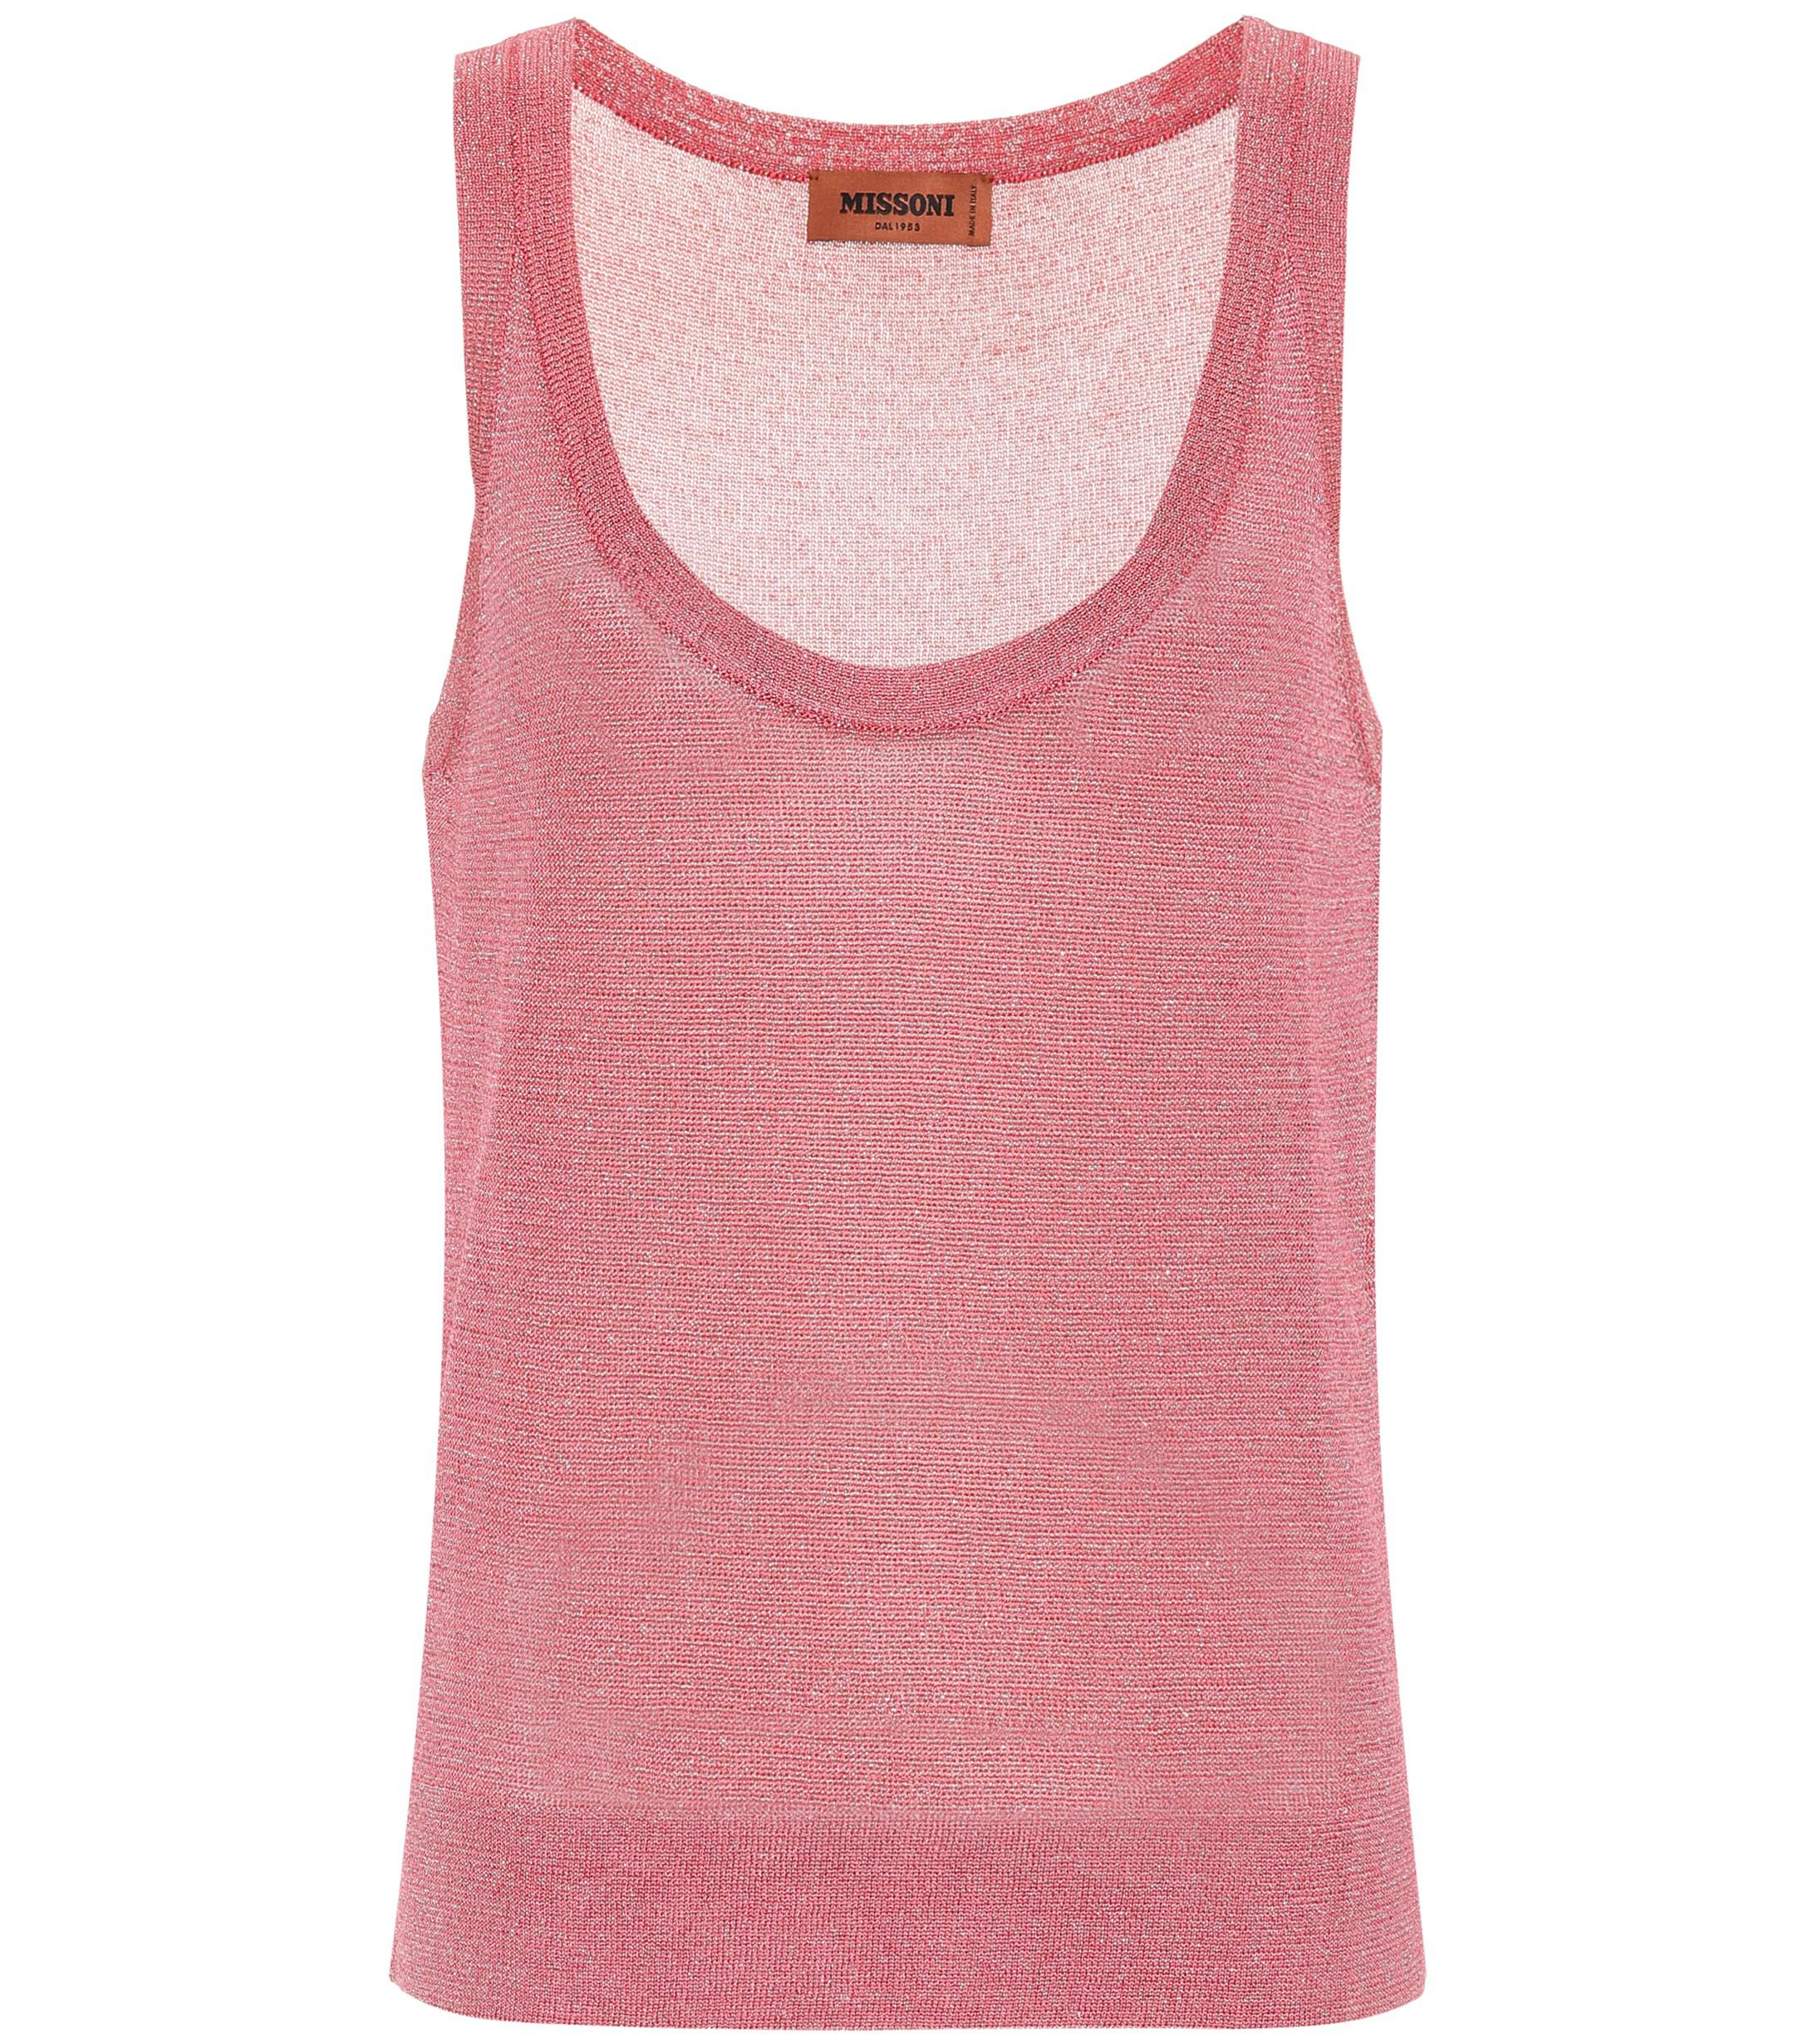 Lyst - Missoni Sleeveless Knit Top in Pink